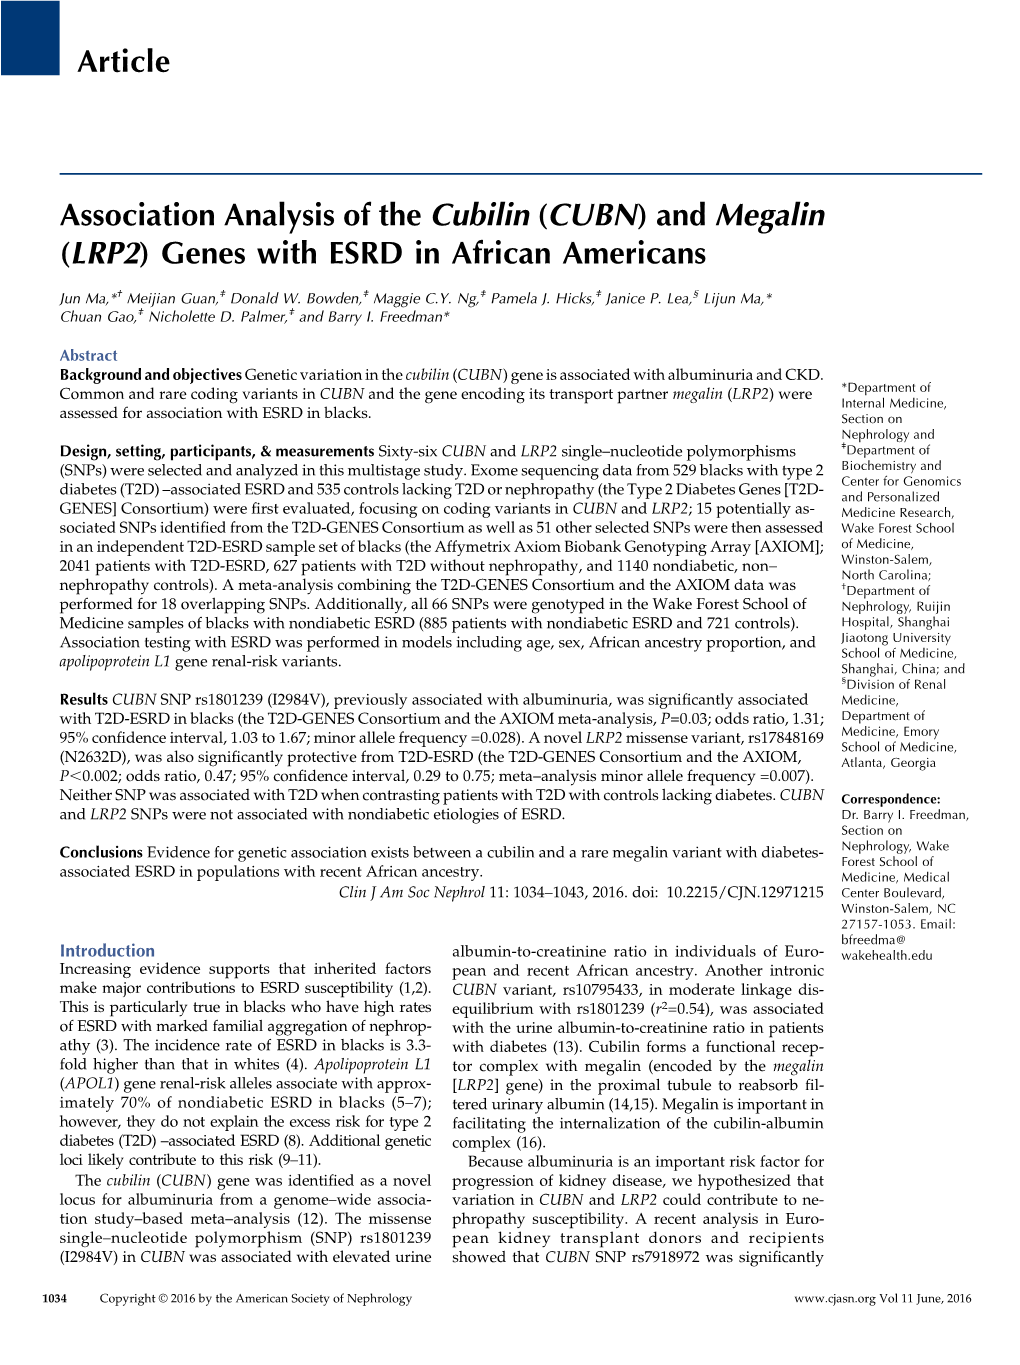 Association Analysis of the Cubilin (CUBN) and Megalin (LRP2) Genes with ESRD in African Americans